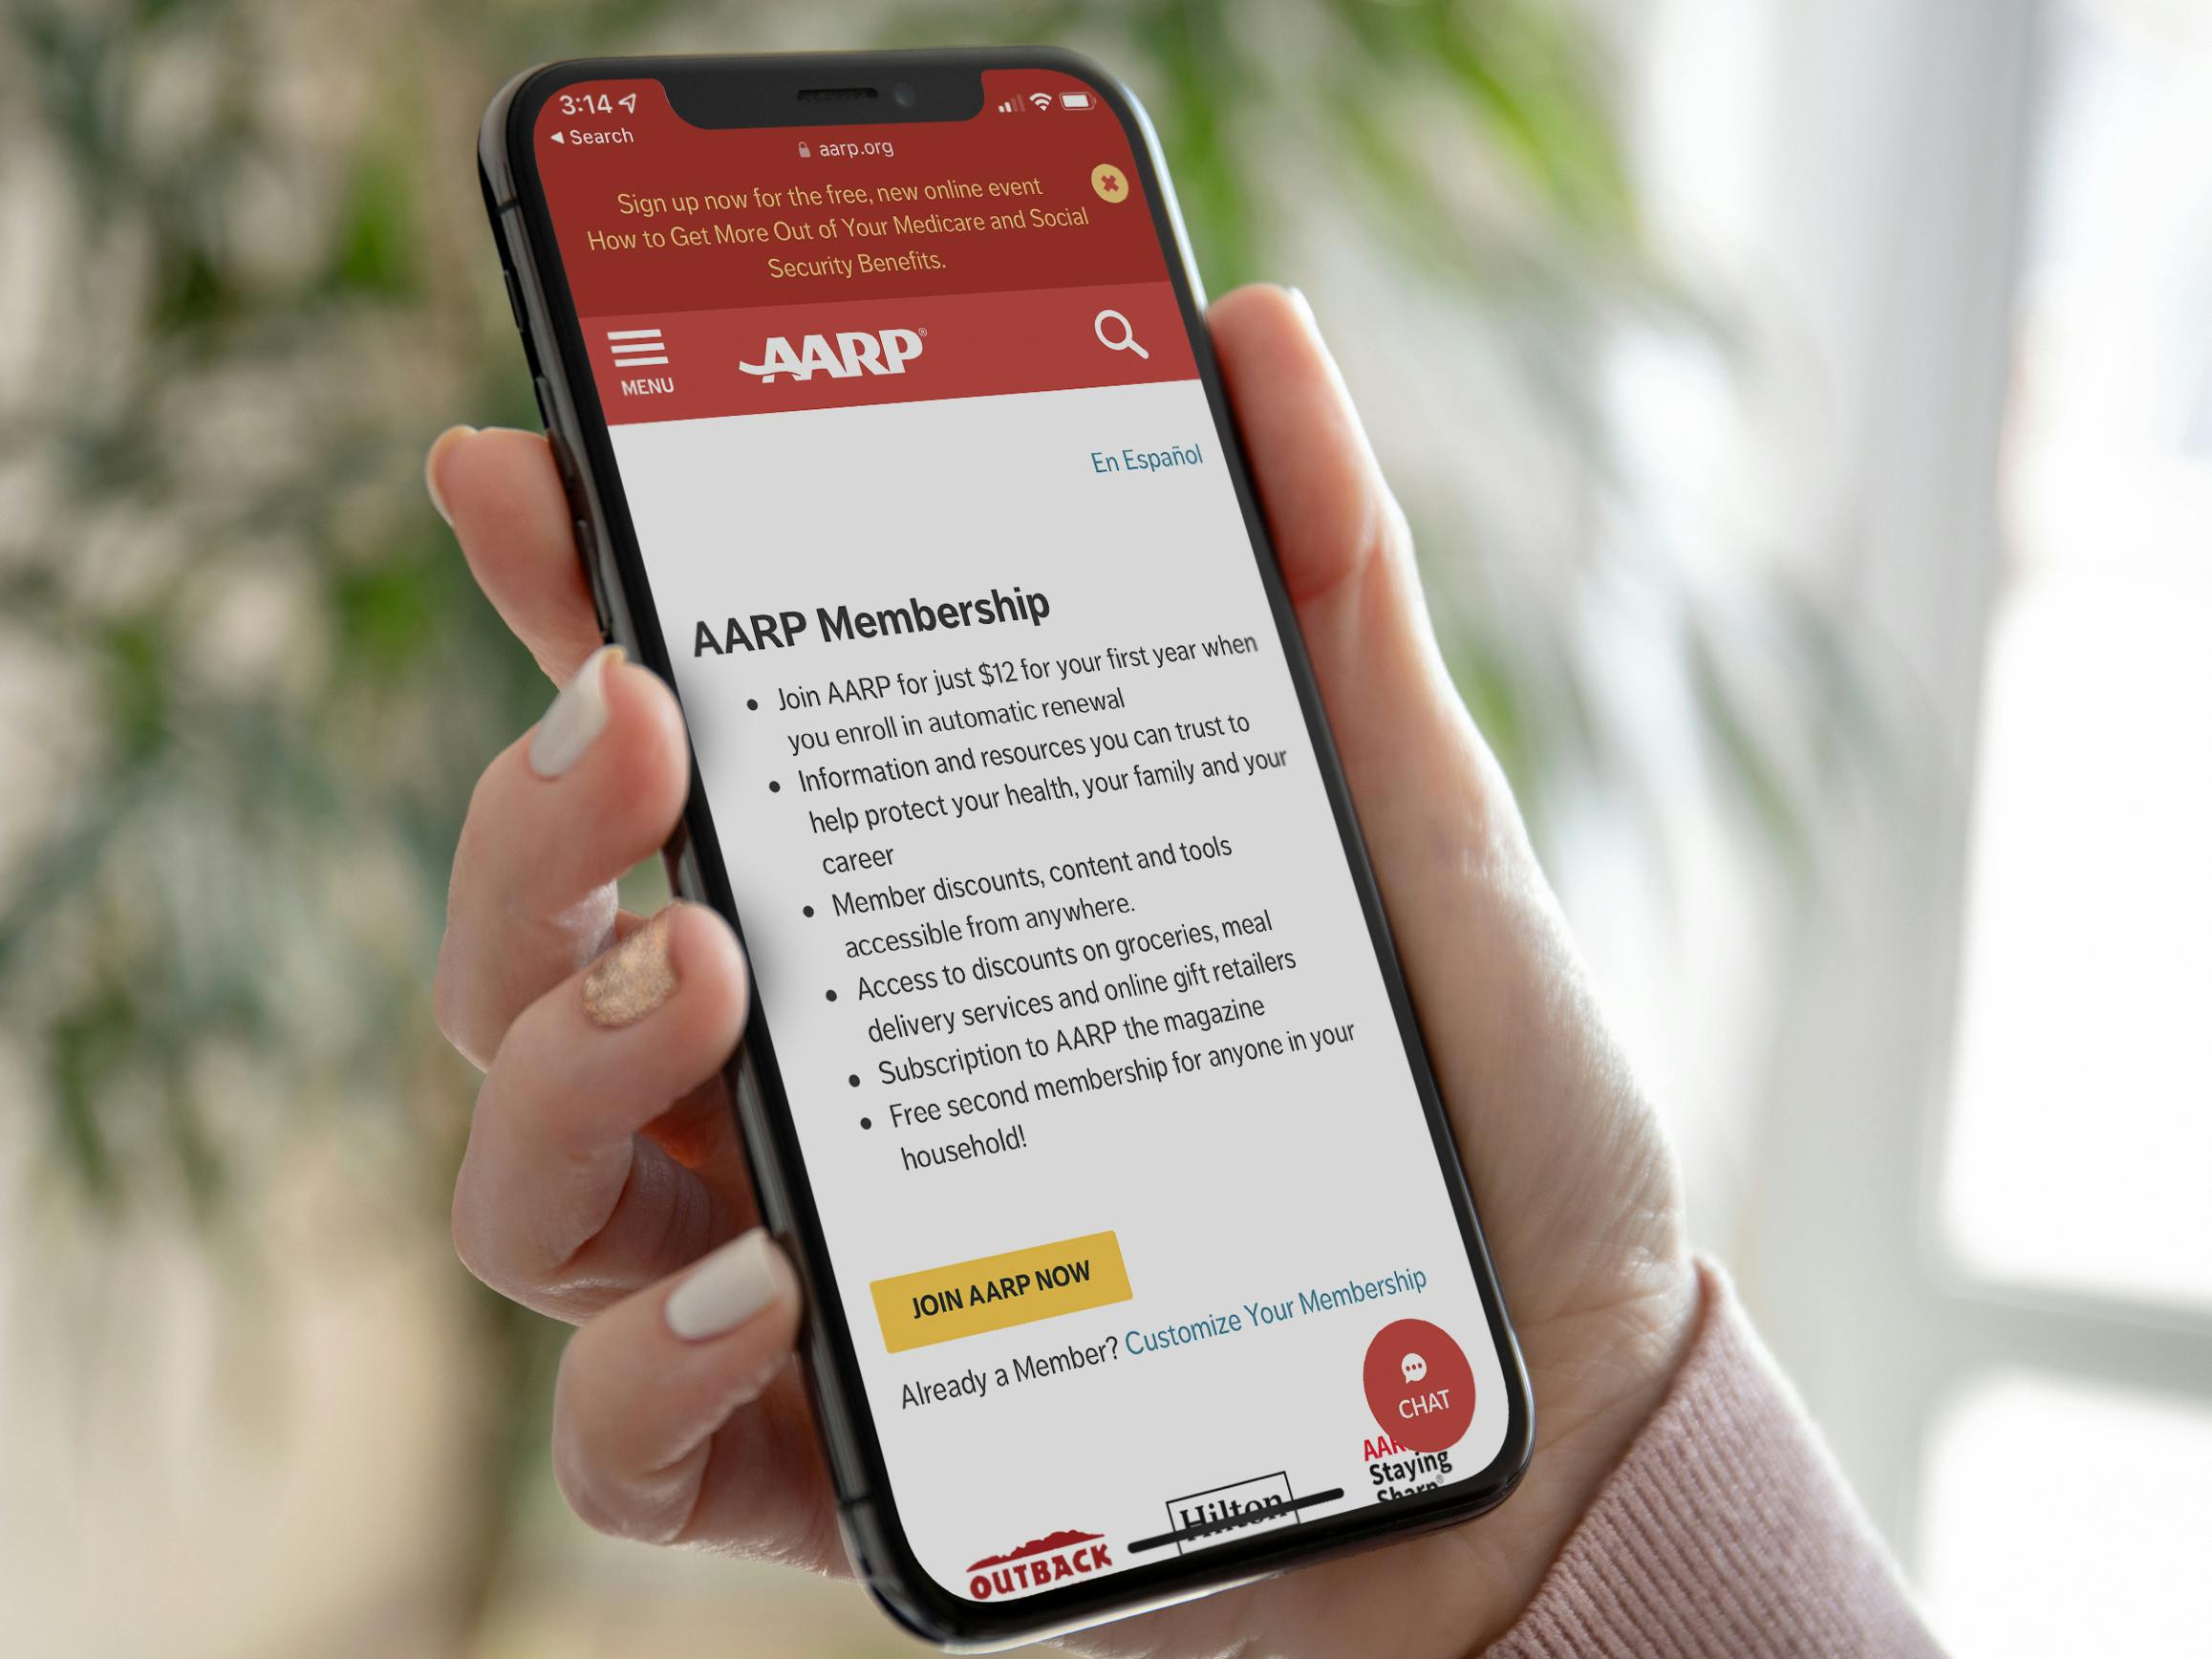 aarp-hotel-discounts-can-save-you-up-to-20-the-krazy-coupon-lady